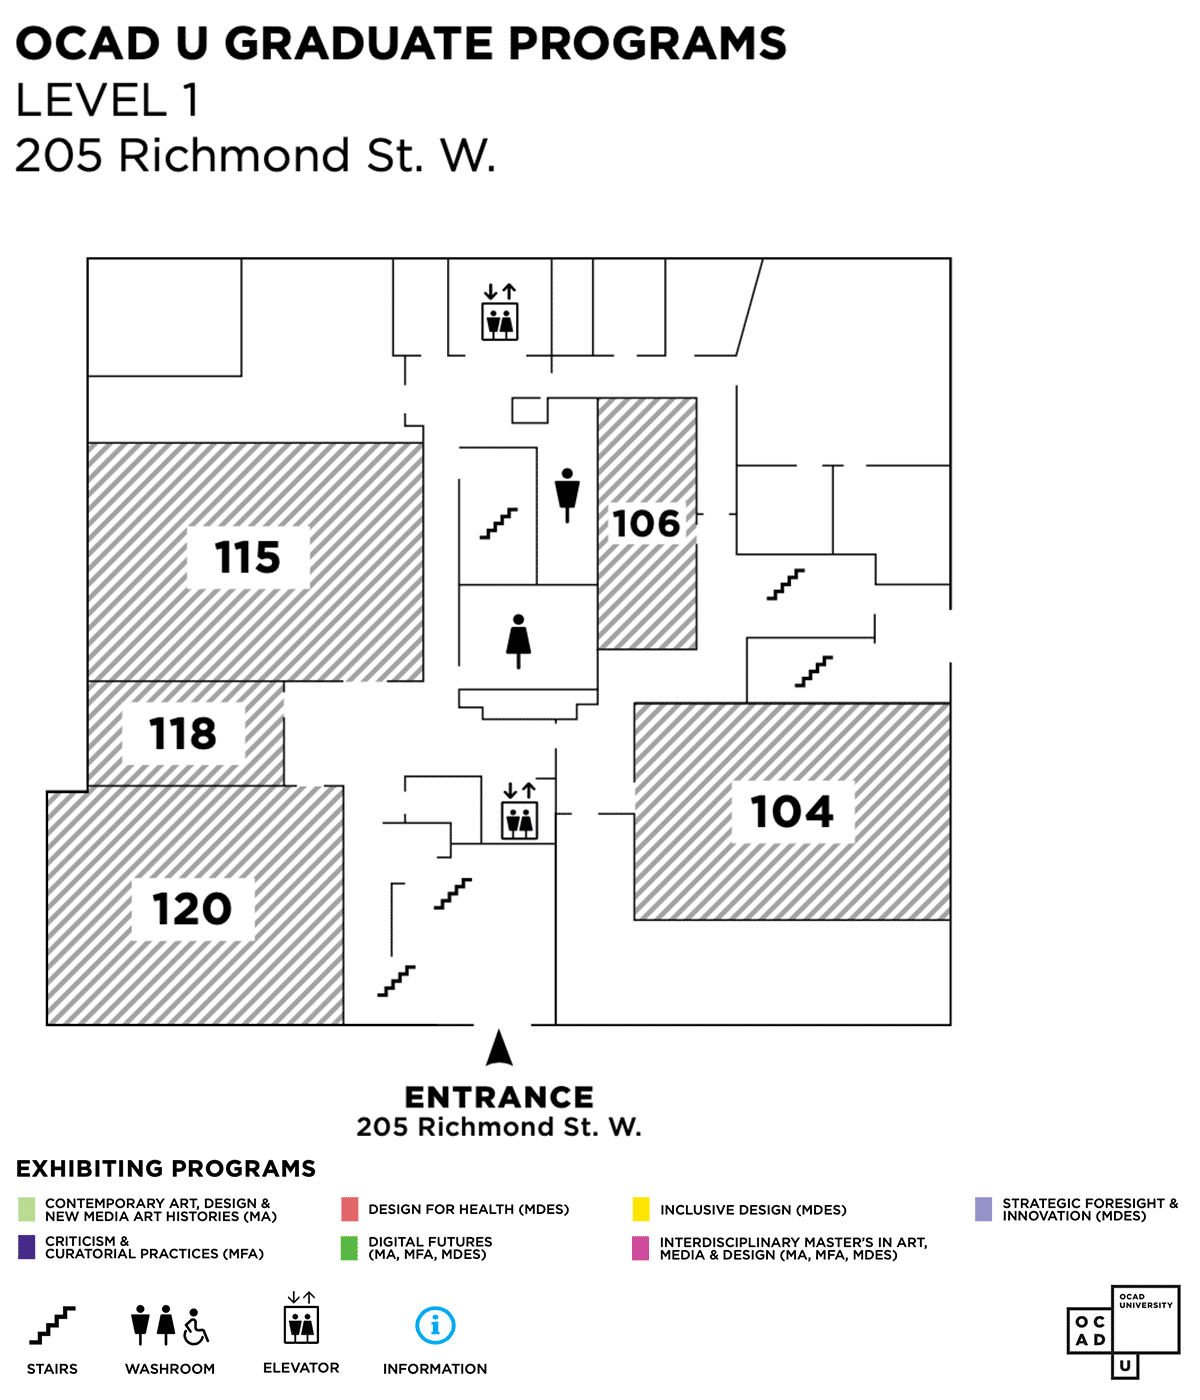 Map of 205 Richmond street level 1. Exhibitions in rooms 104, 106, 115, 118, 120.